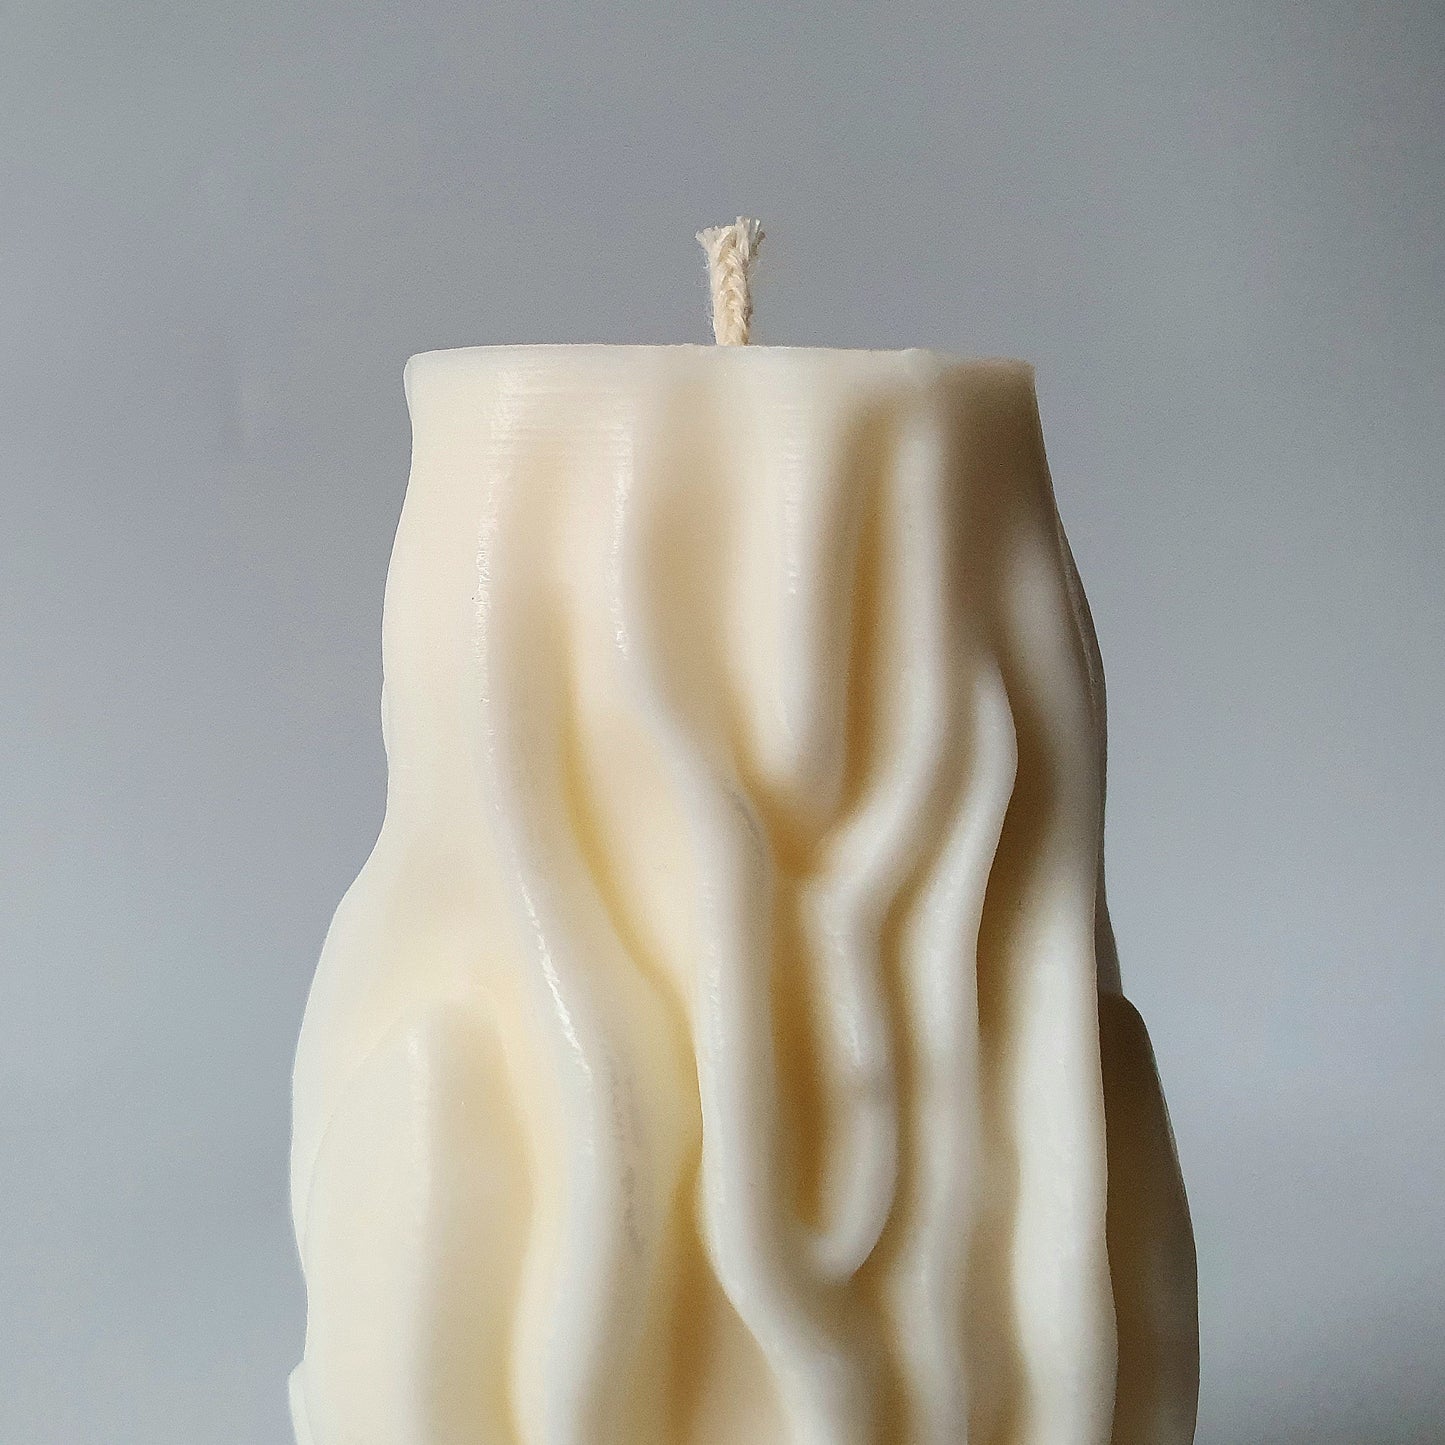 Structured candle